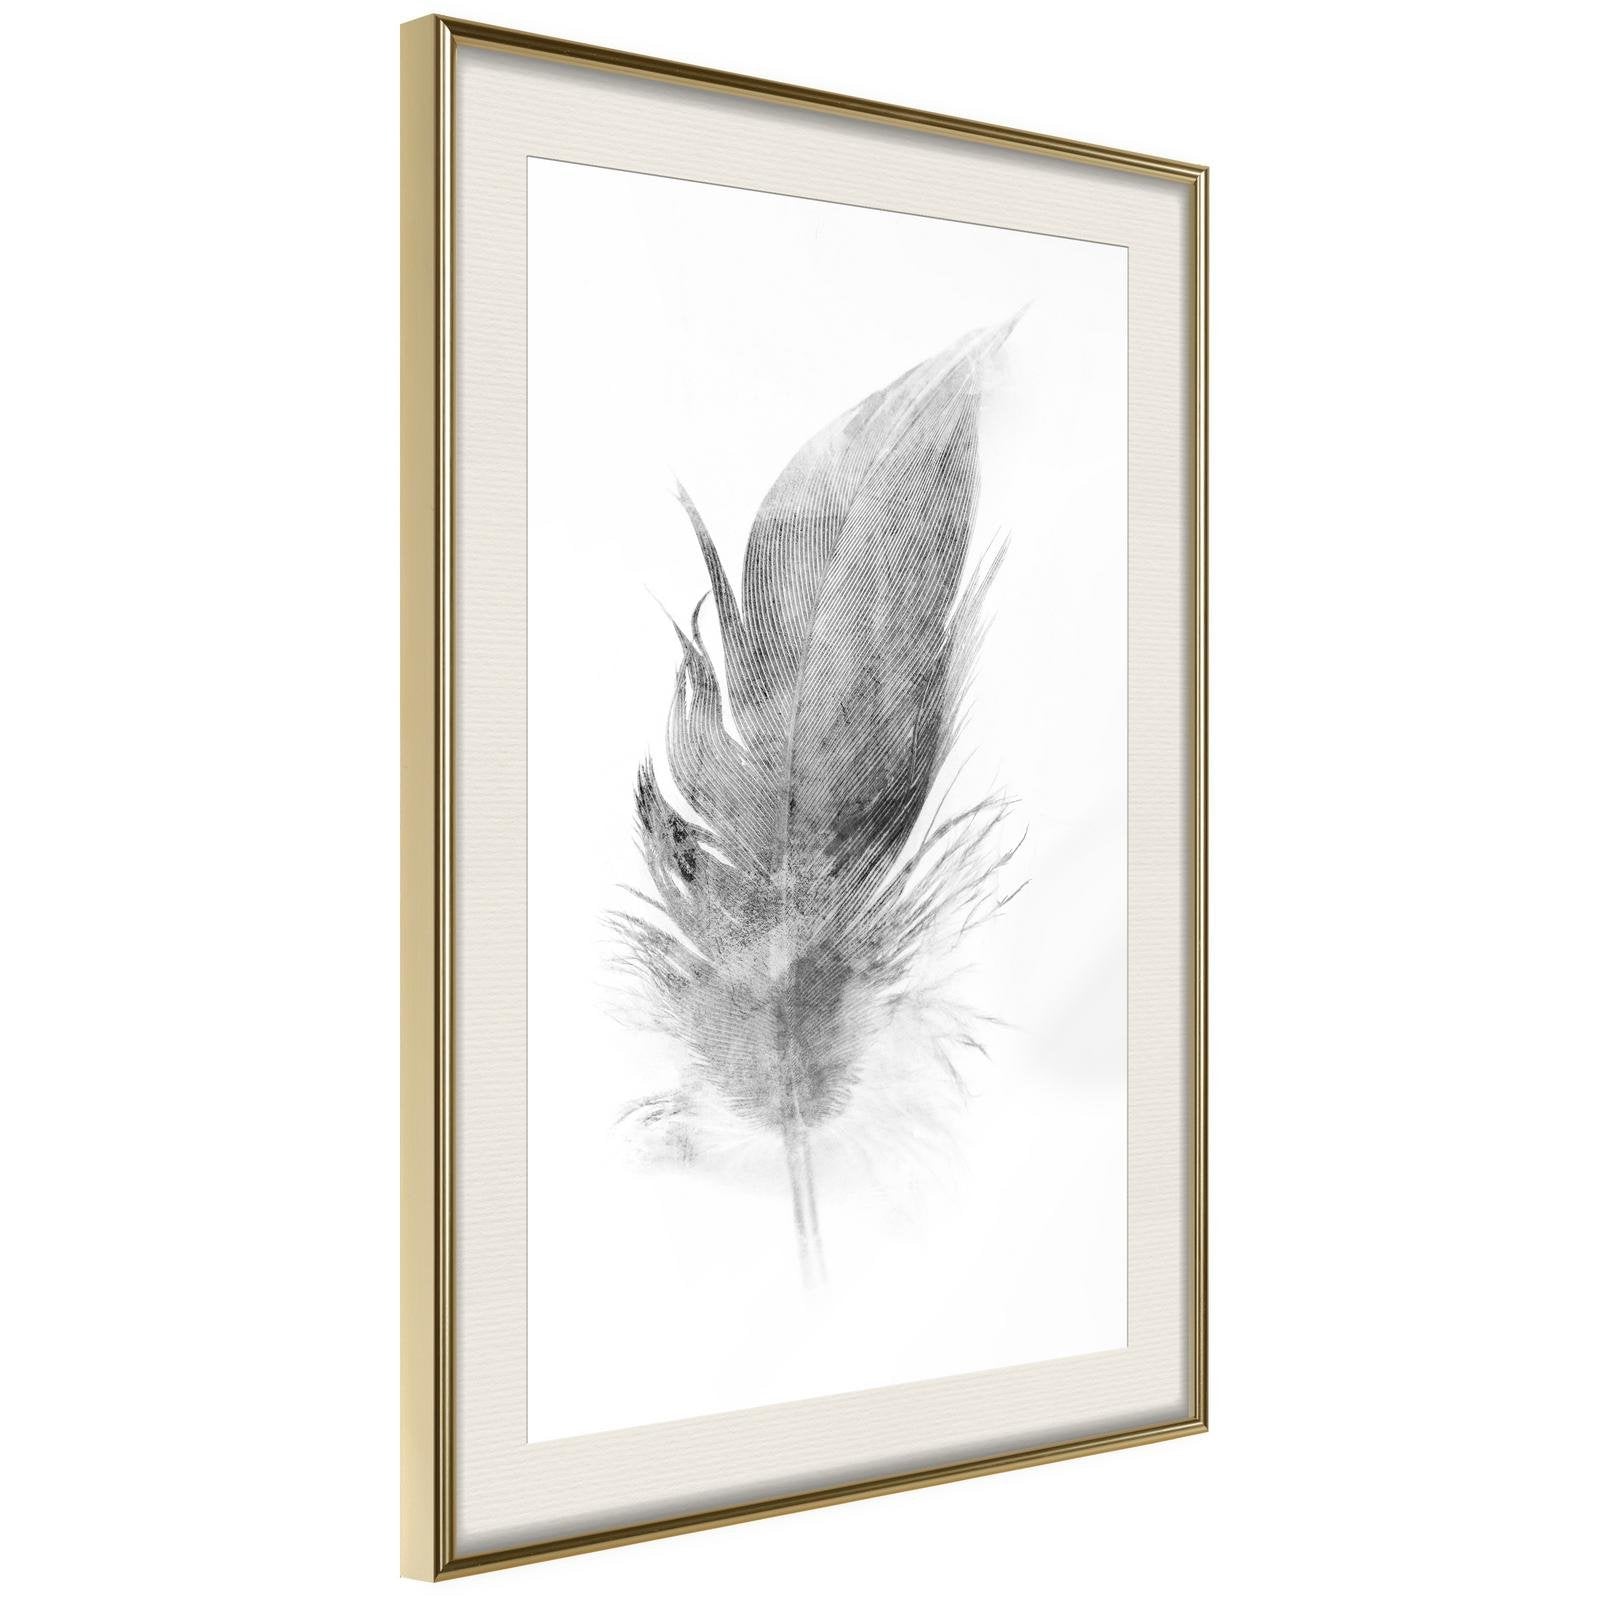 Inramad Poster / Tavla - Lost Feather (Grey)-Poster Inramad-Artgeist-20x30-Guldram med passepartout-peaceofhome.se